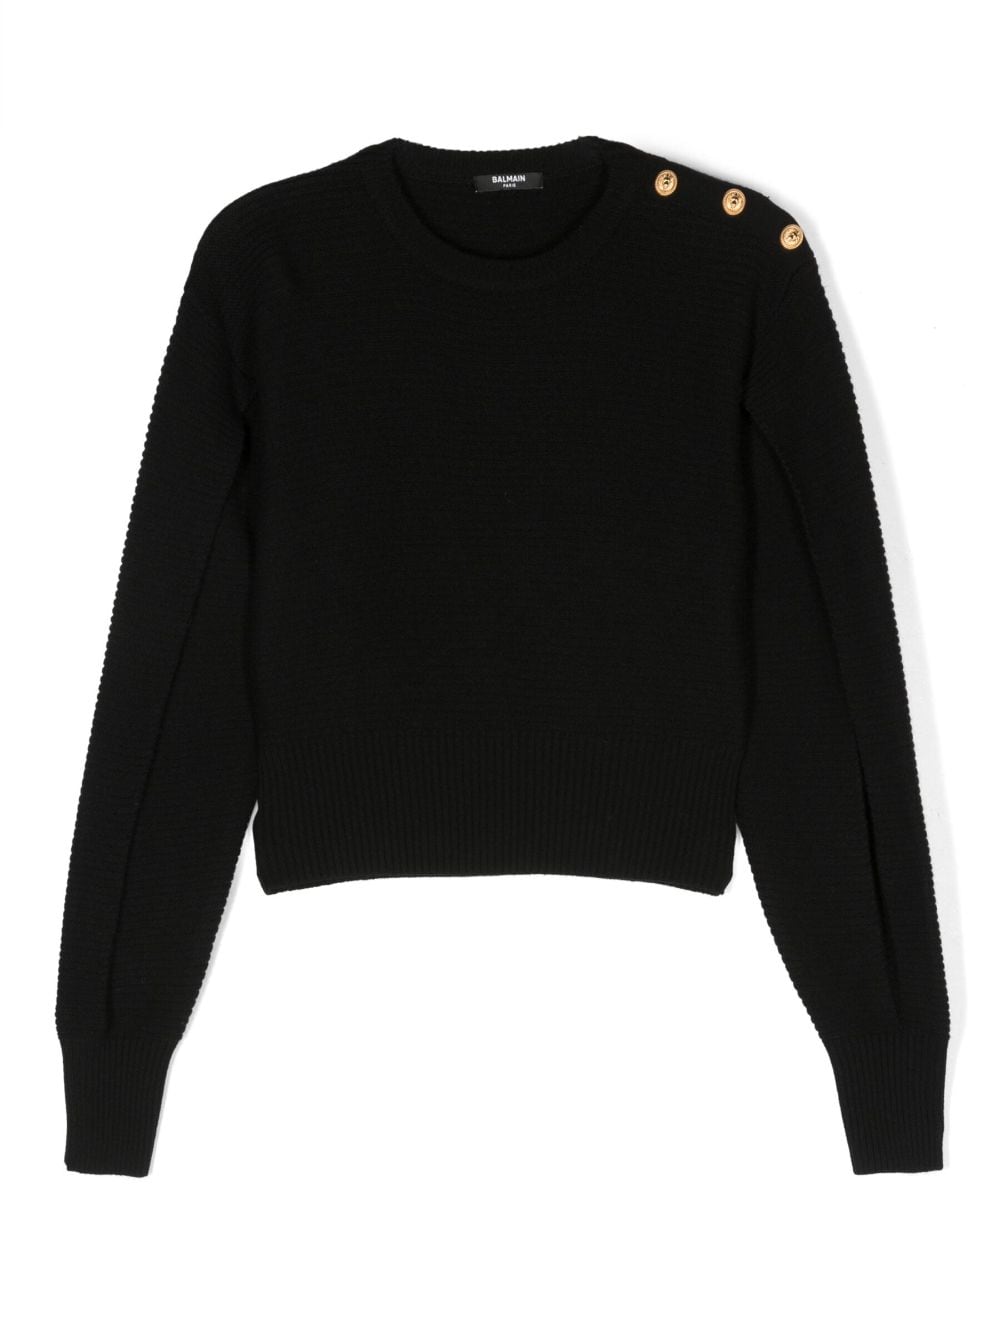 Black sweater for girls with gold buttons